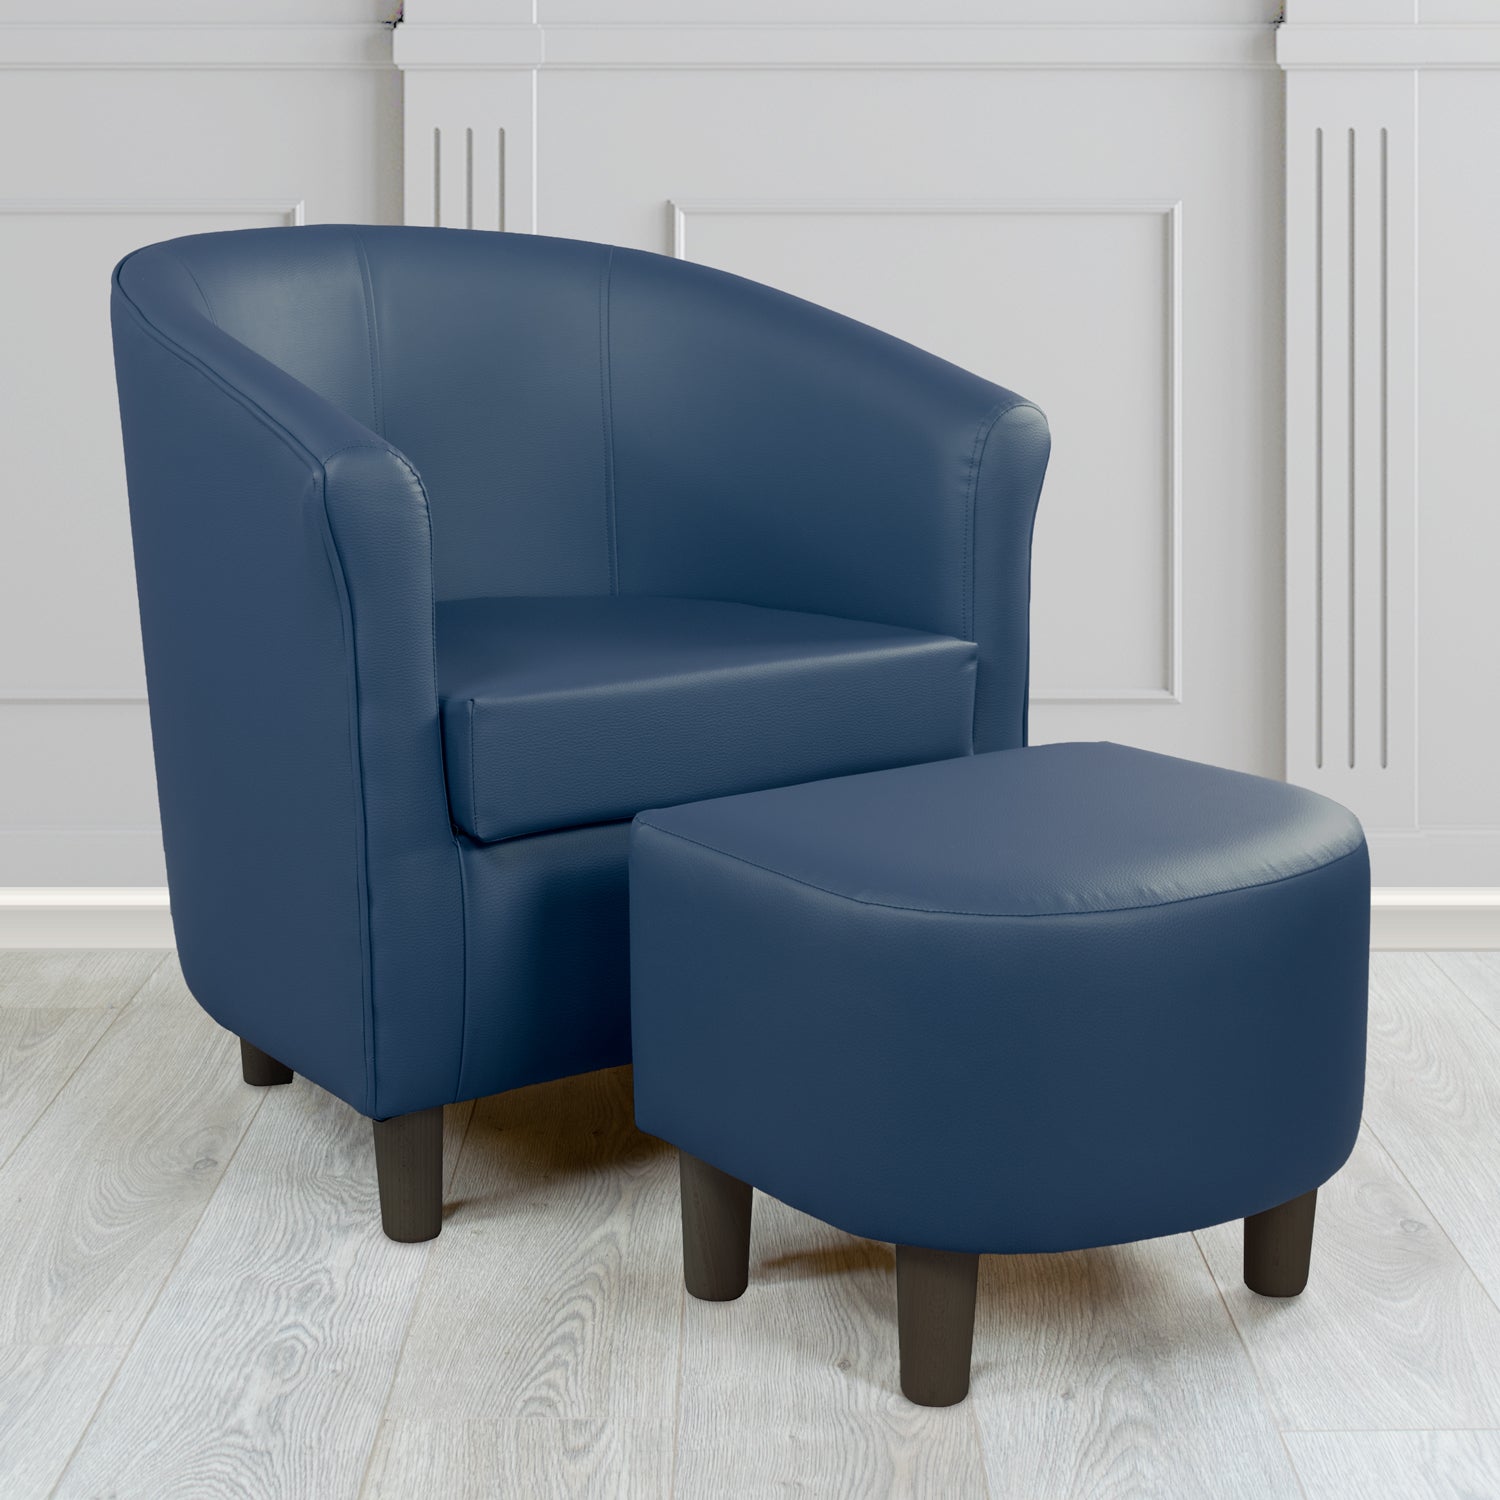 Tuscany Just Colour Sapphire Blue Faux Leather Tub Chair with Footstool Set - The Tub Chair Shop